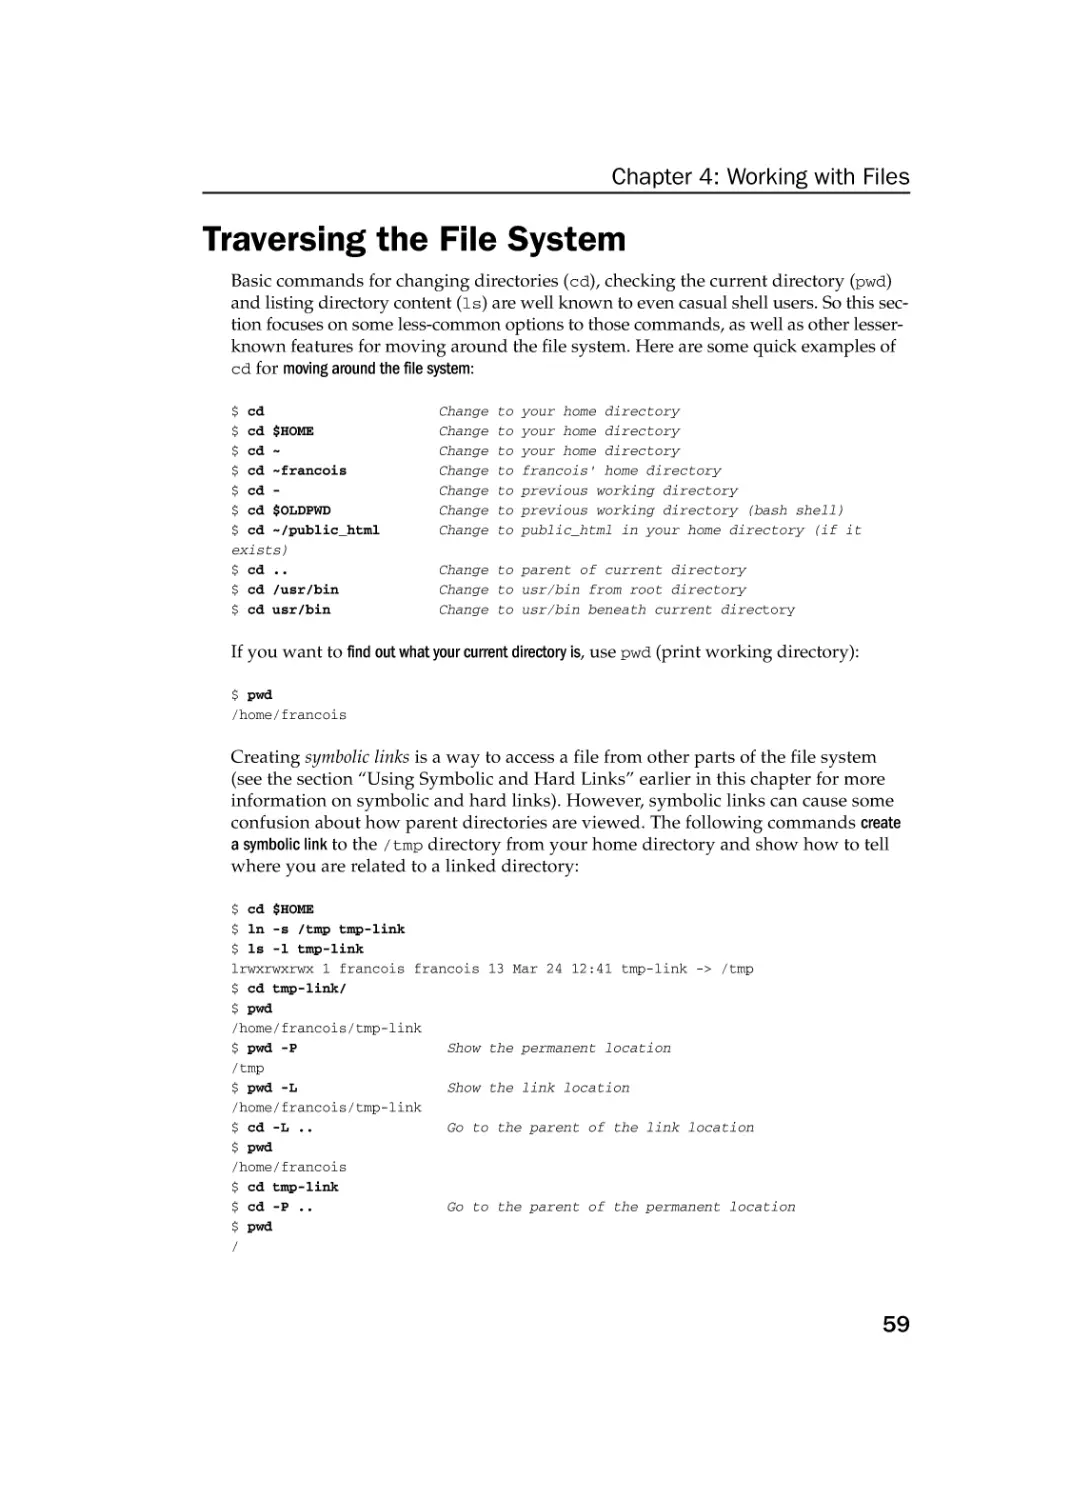 Traversing the File System